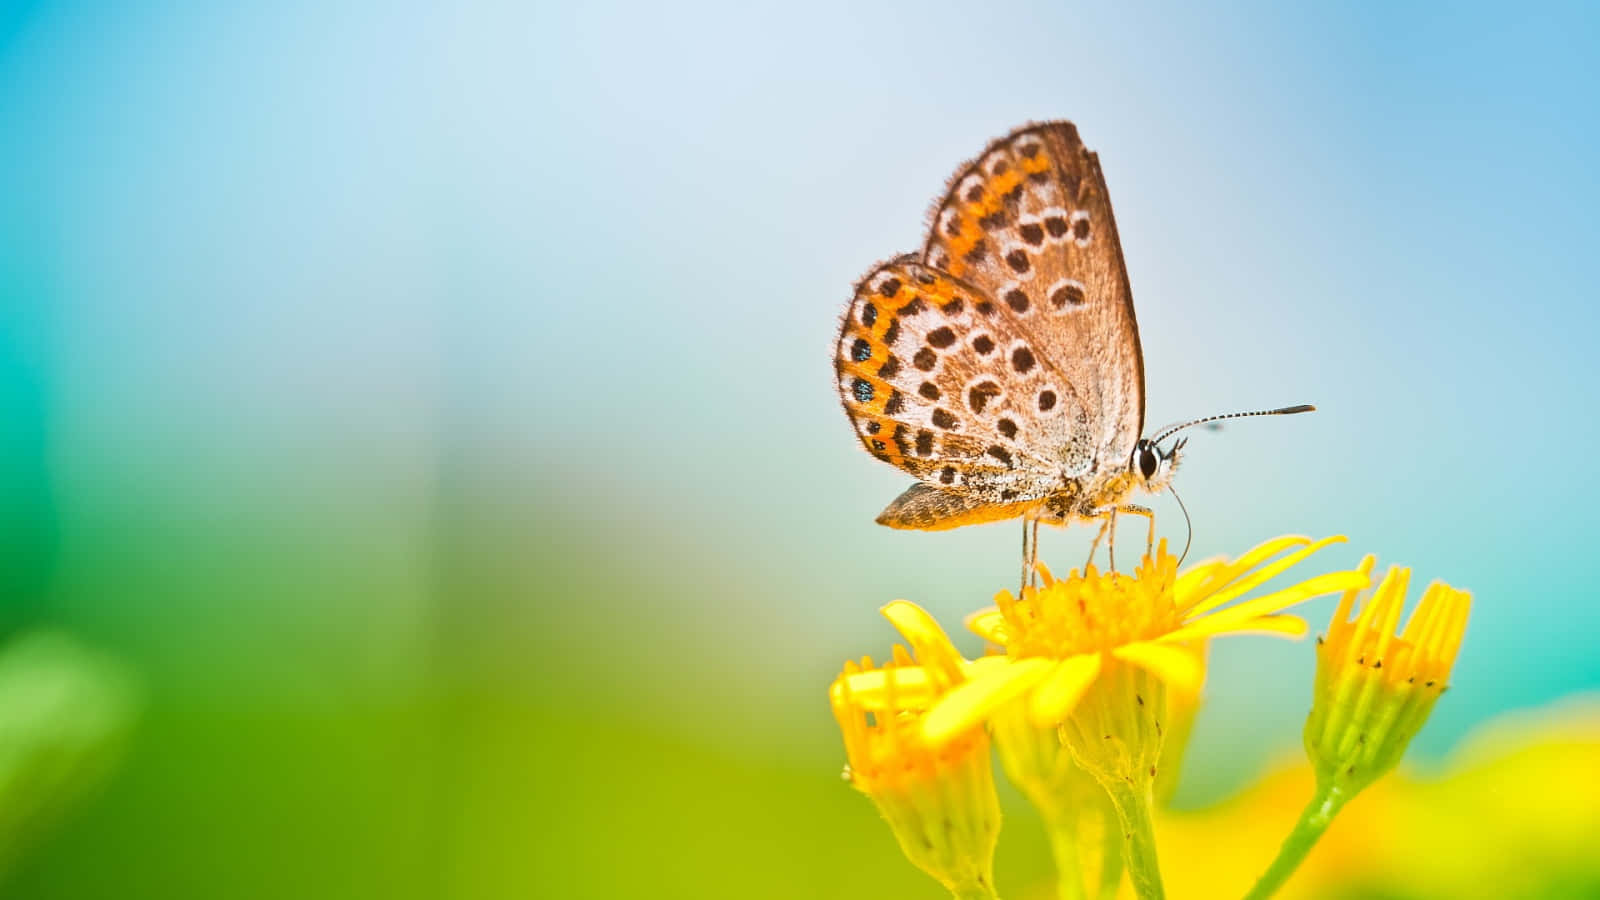 Bright and Colorful Butterfly on a Summer Day Wallpaper